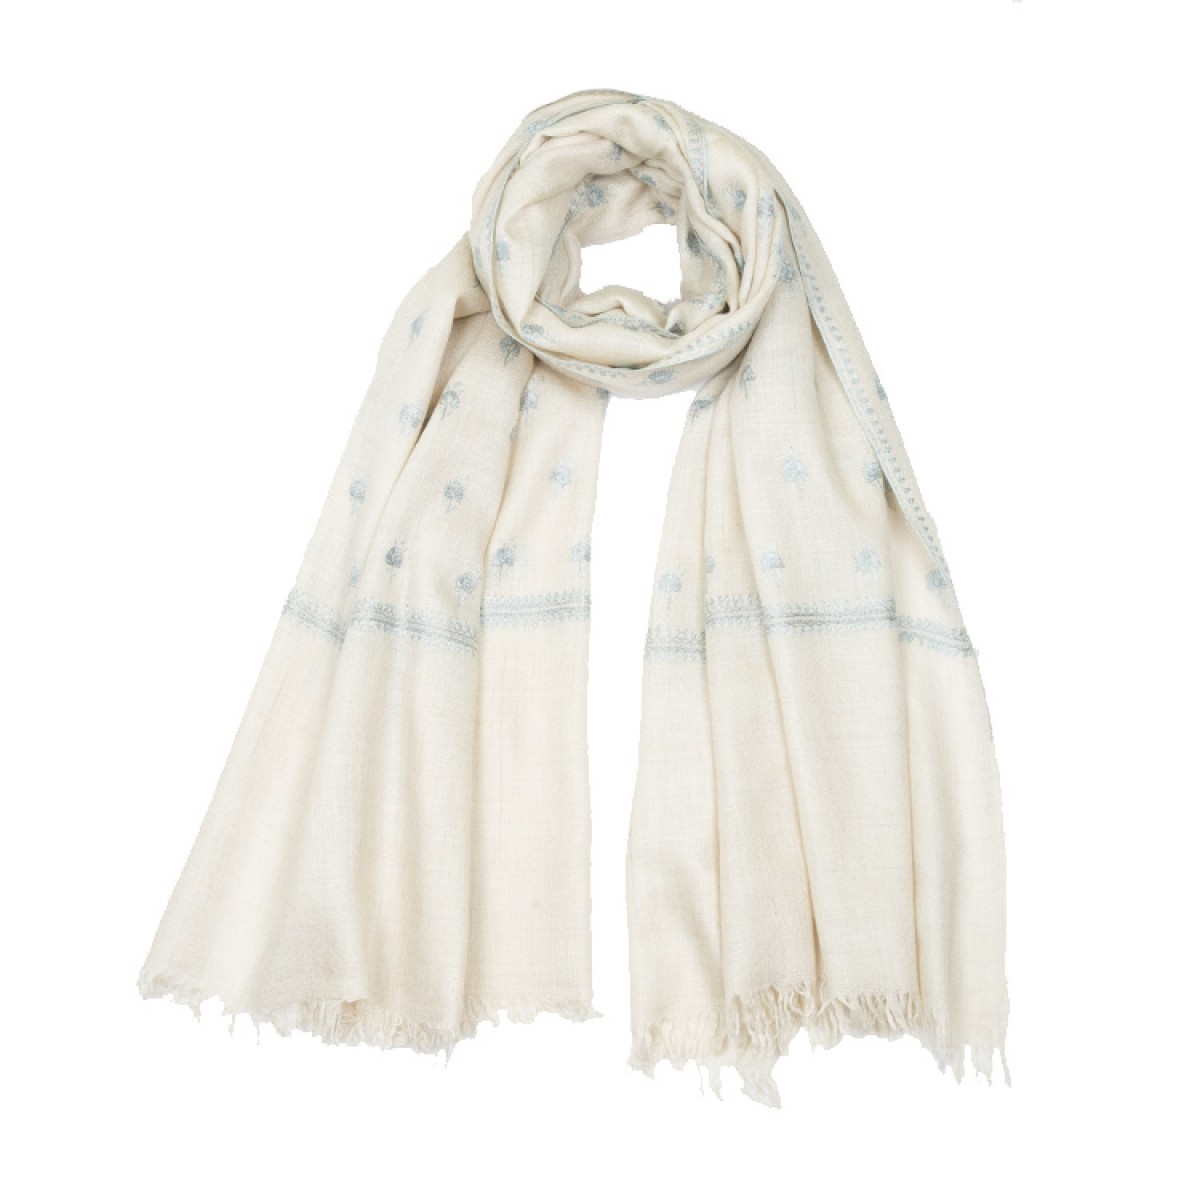 Embroidered Pashmina Stole - Off White & Baby Blue